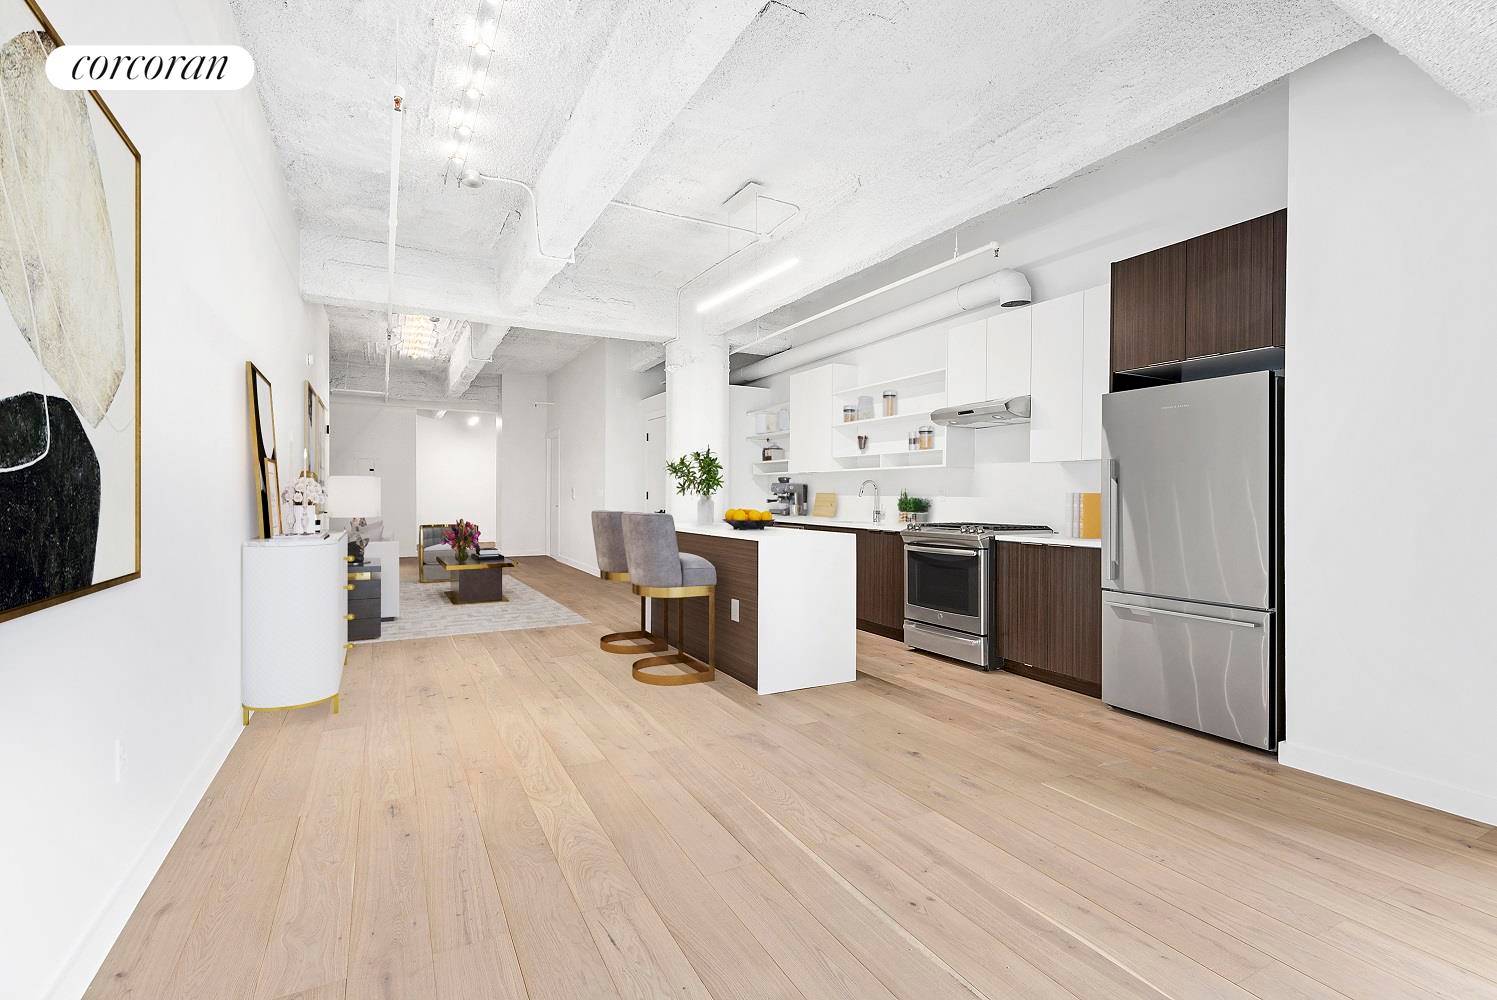 Fully renovated Sprawling and unique 1500sf Gallery Loft with large alcove.